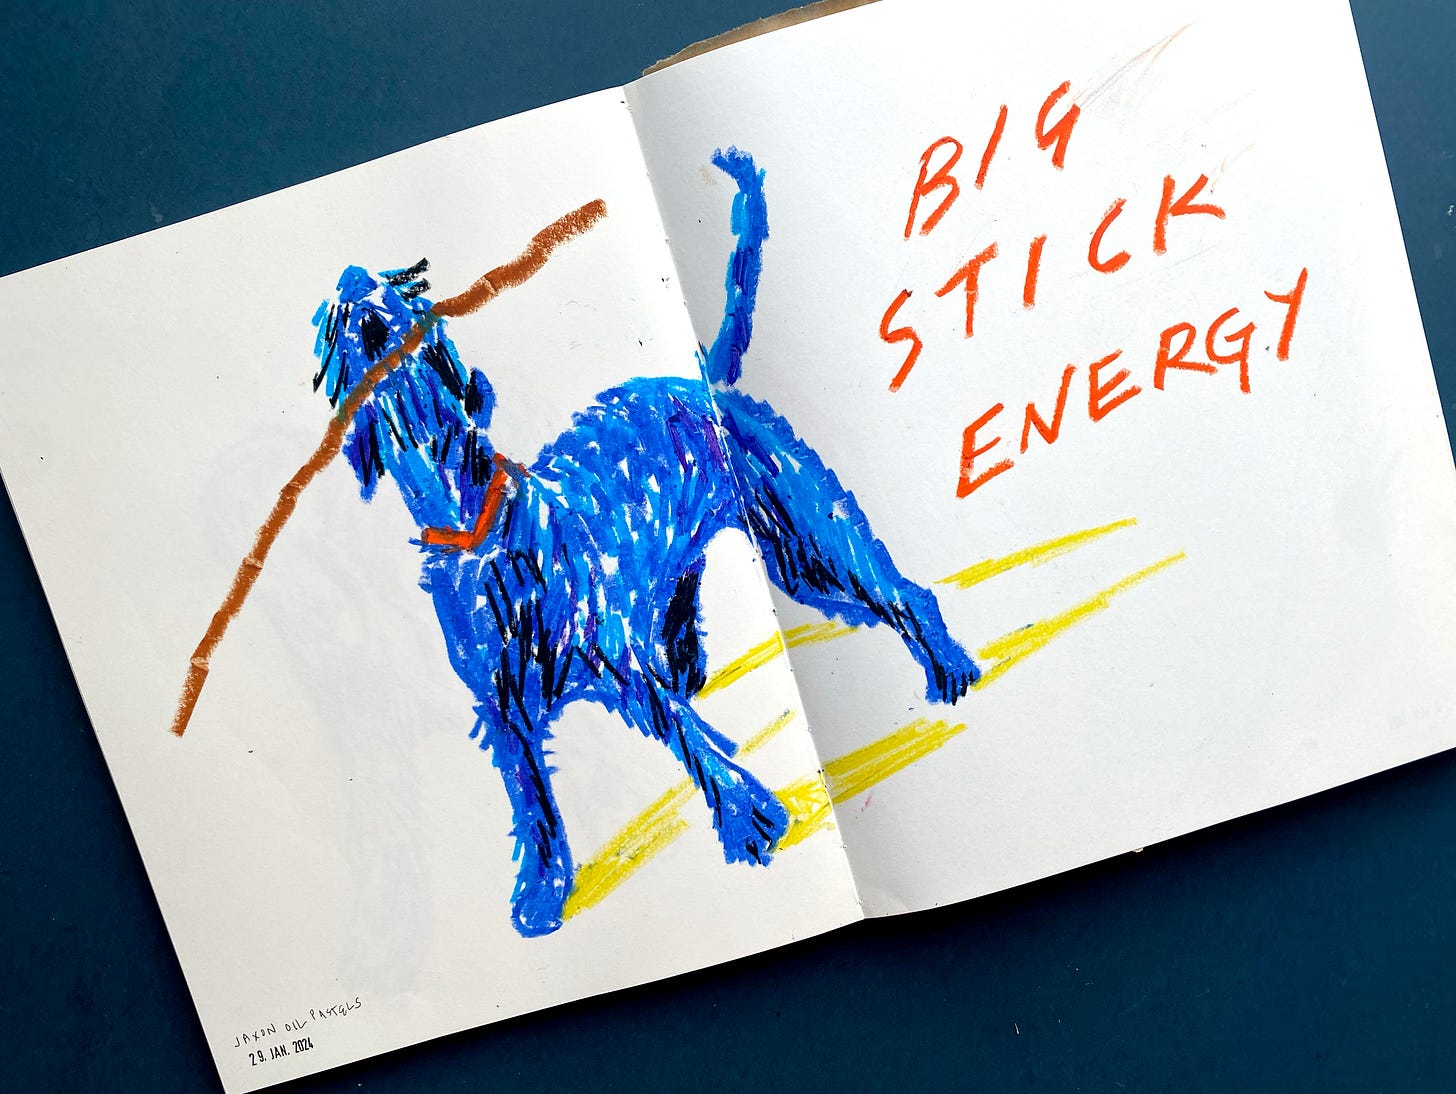 Sketch of a Giant Schnauzer dog, drawn with oil pastels in a loose style. The drawing is shown on an open sketchbook against a dark blue background.